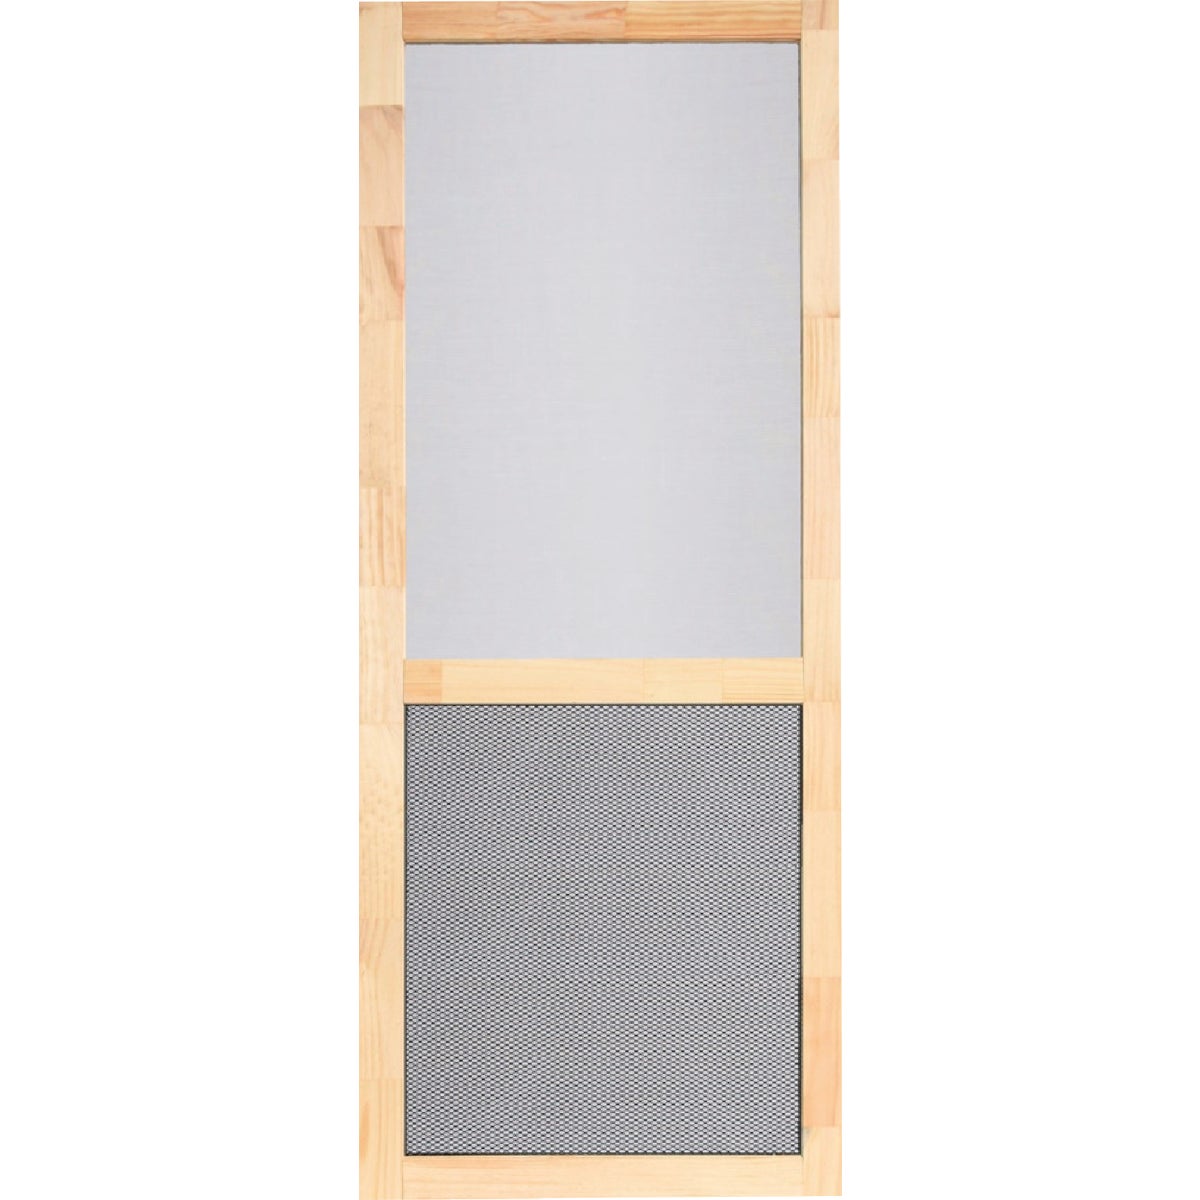 Screen Tight Century Pet Guard 32 In. W x 80 In. H x 1 1/8 In. Thick Natural Wood Screen Door